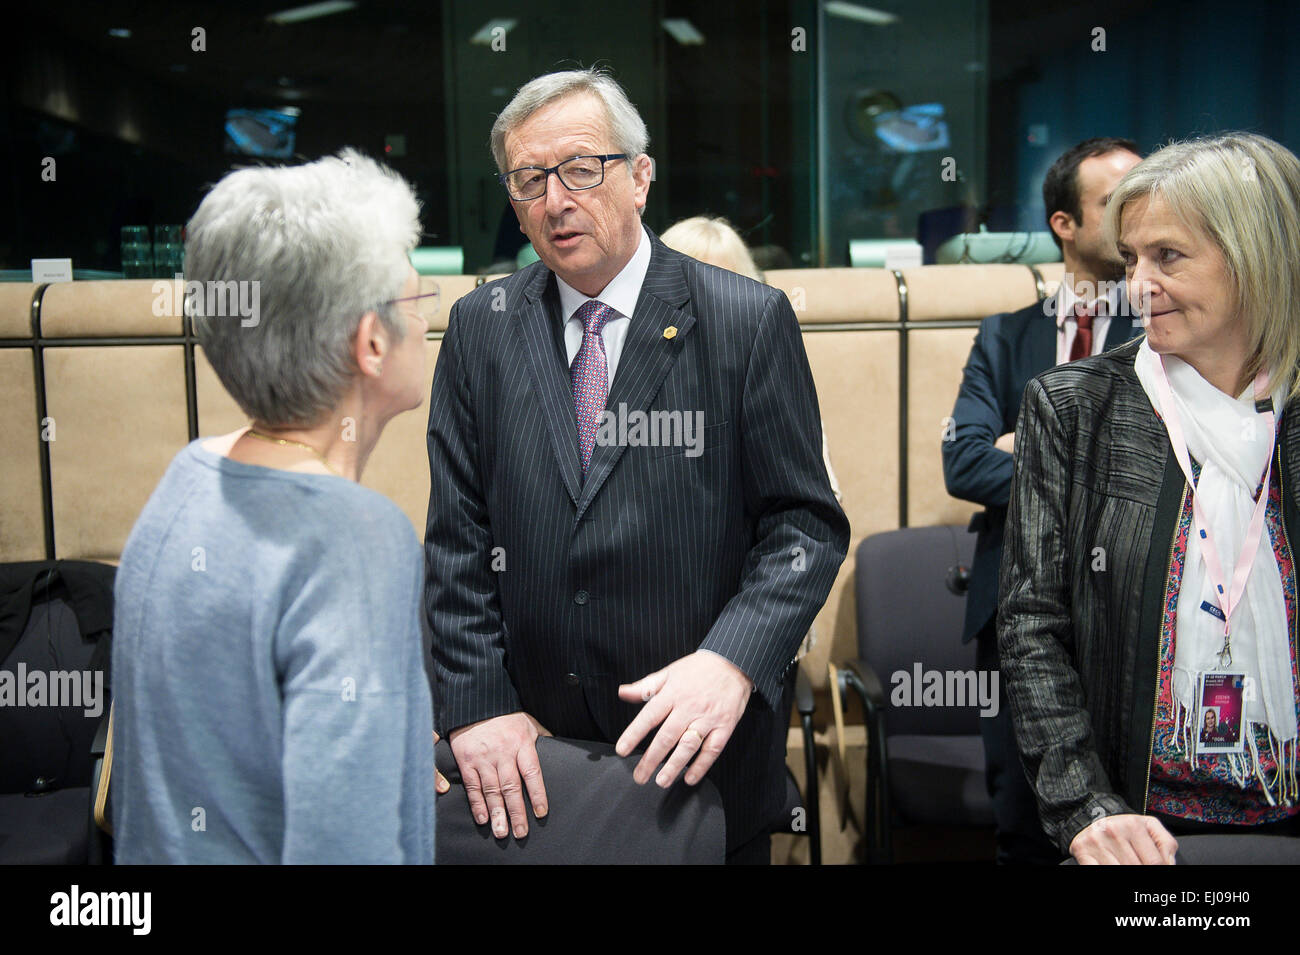 Jean-Claude Juncker, the president of the European Commission (C) at the start of a Tripartite Social Summit ahead of the EU Summit in Brussels, Belgium on 19.03.2015 by Wiktor Dabkowski Stock Photo